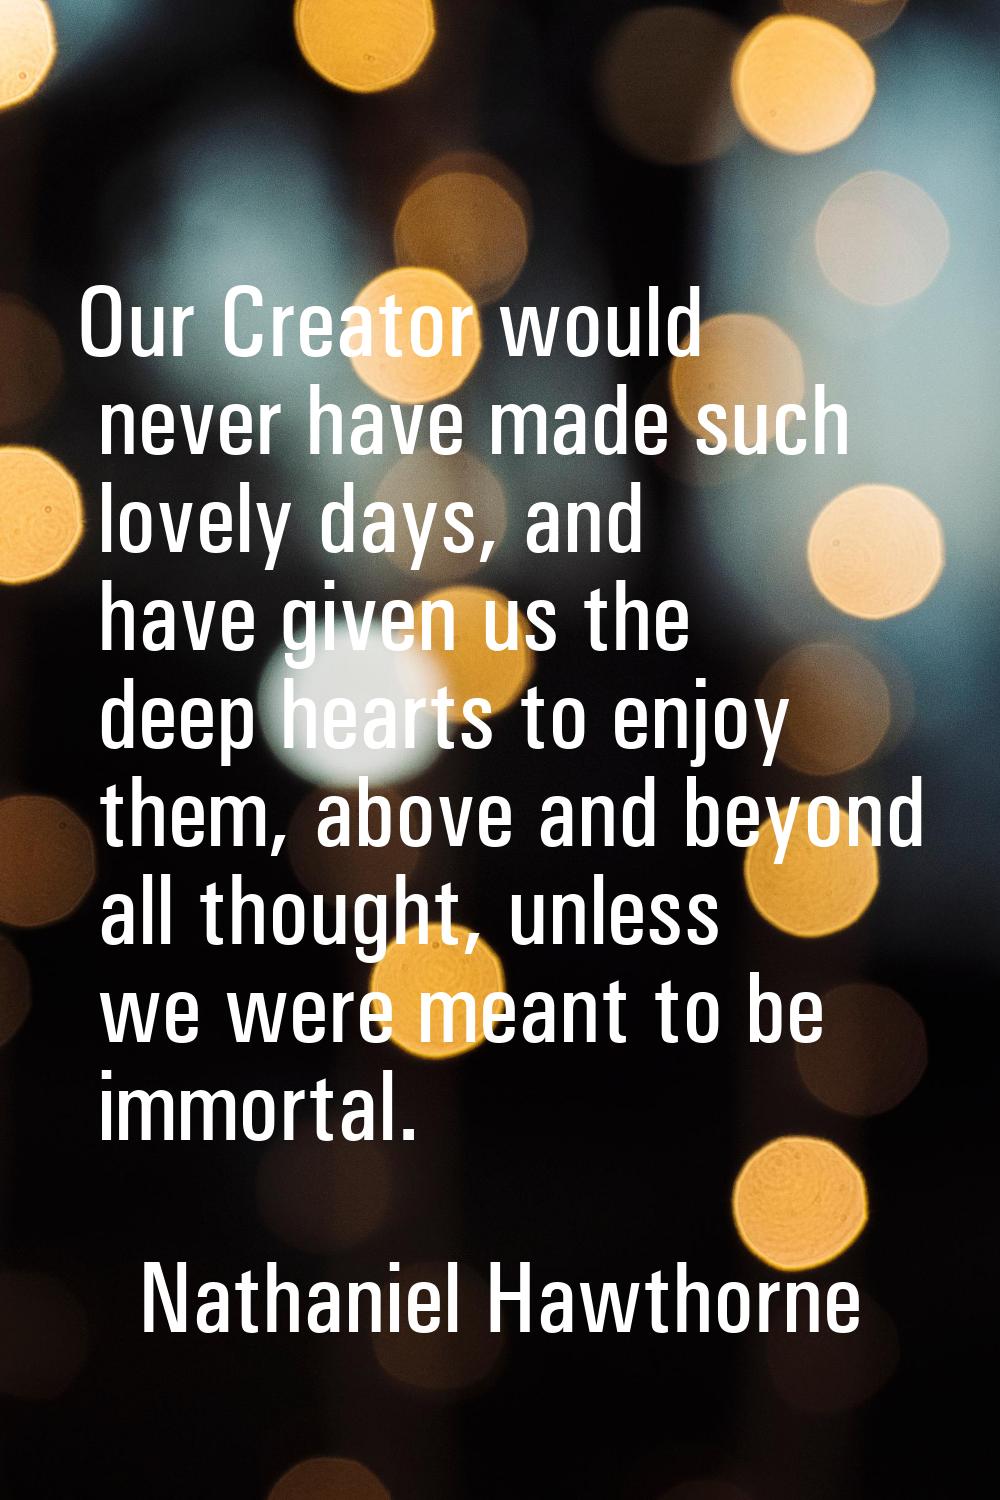 Our Creator would never have made such lovely days, and have given us the deep hearts to enjoy them